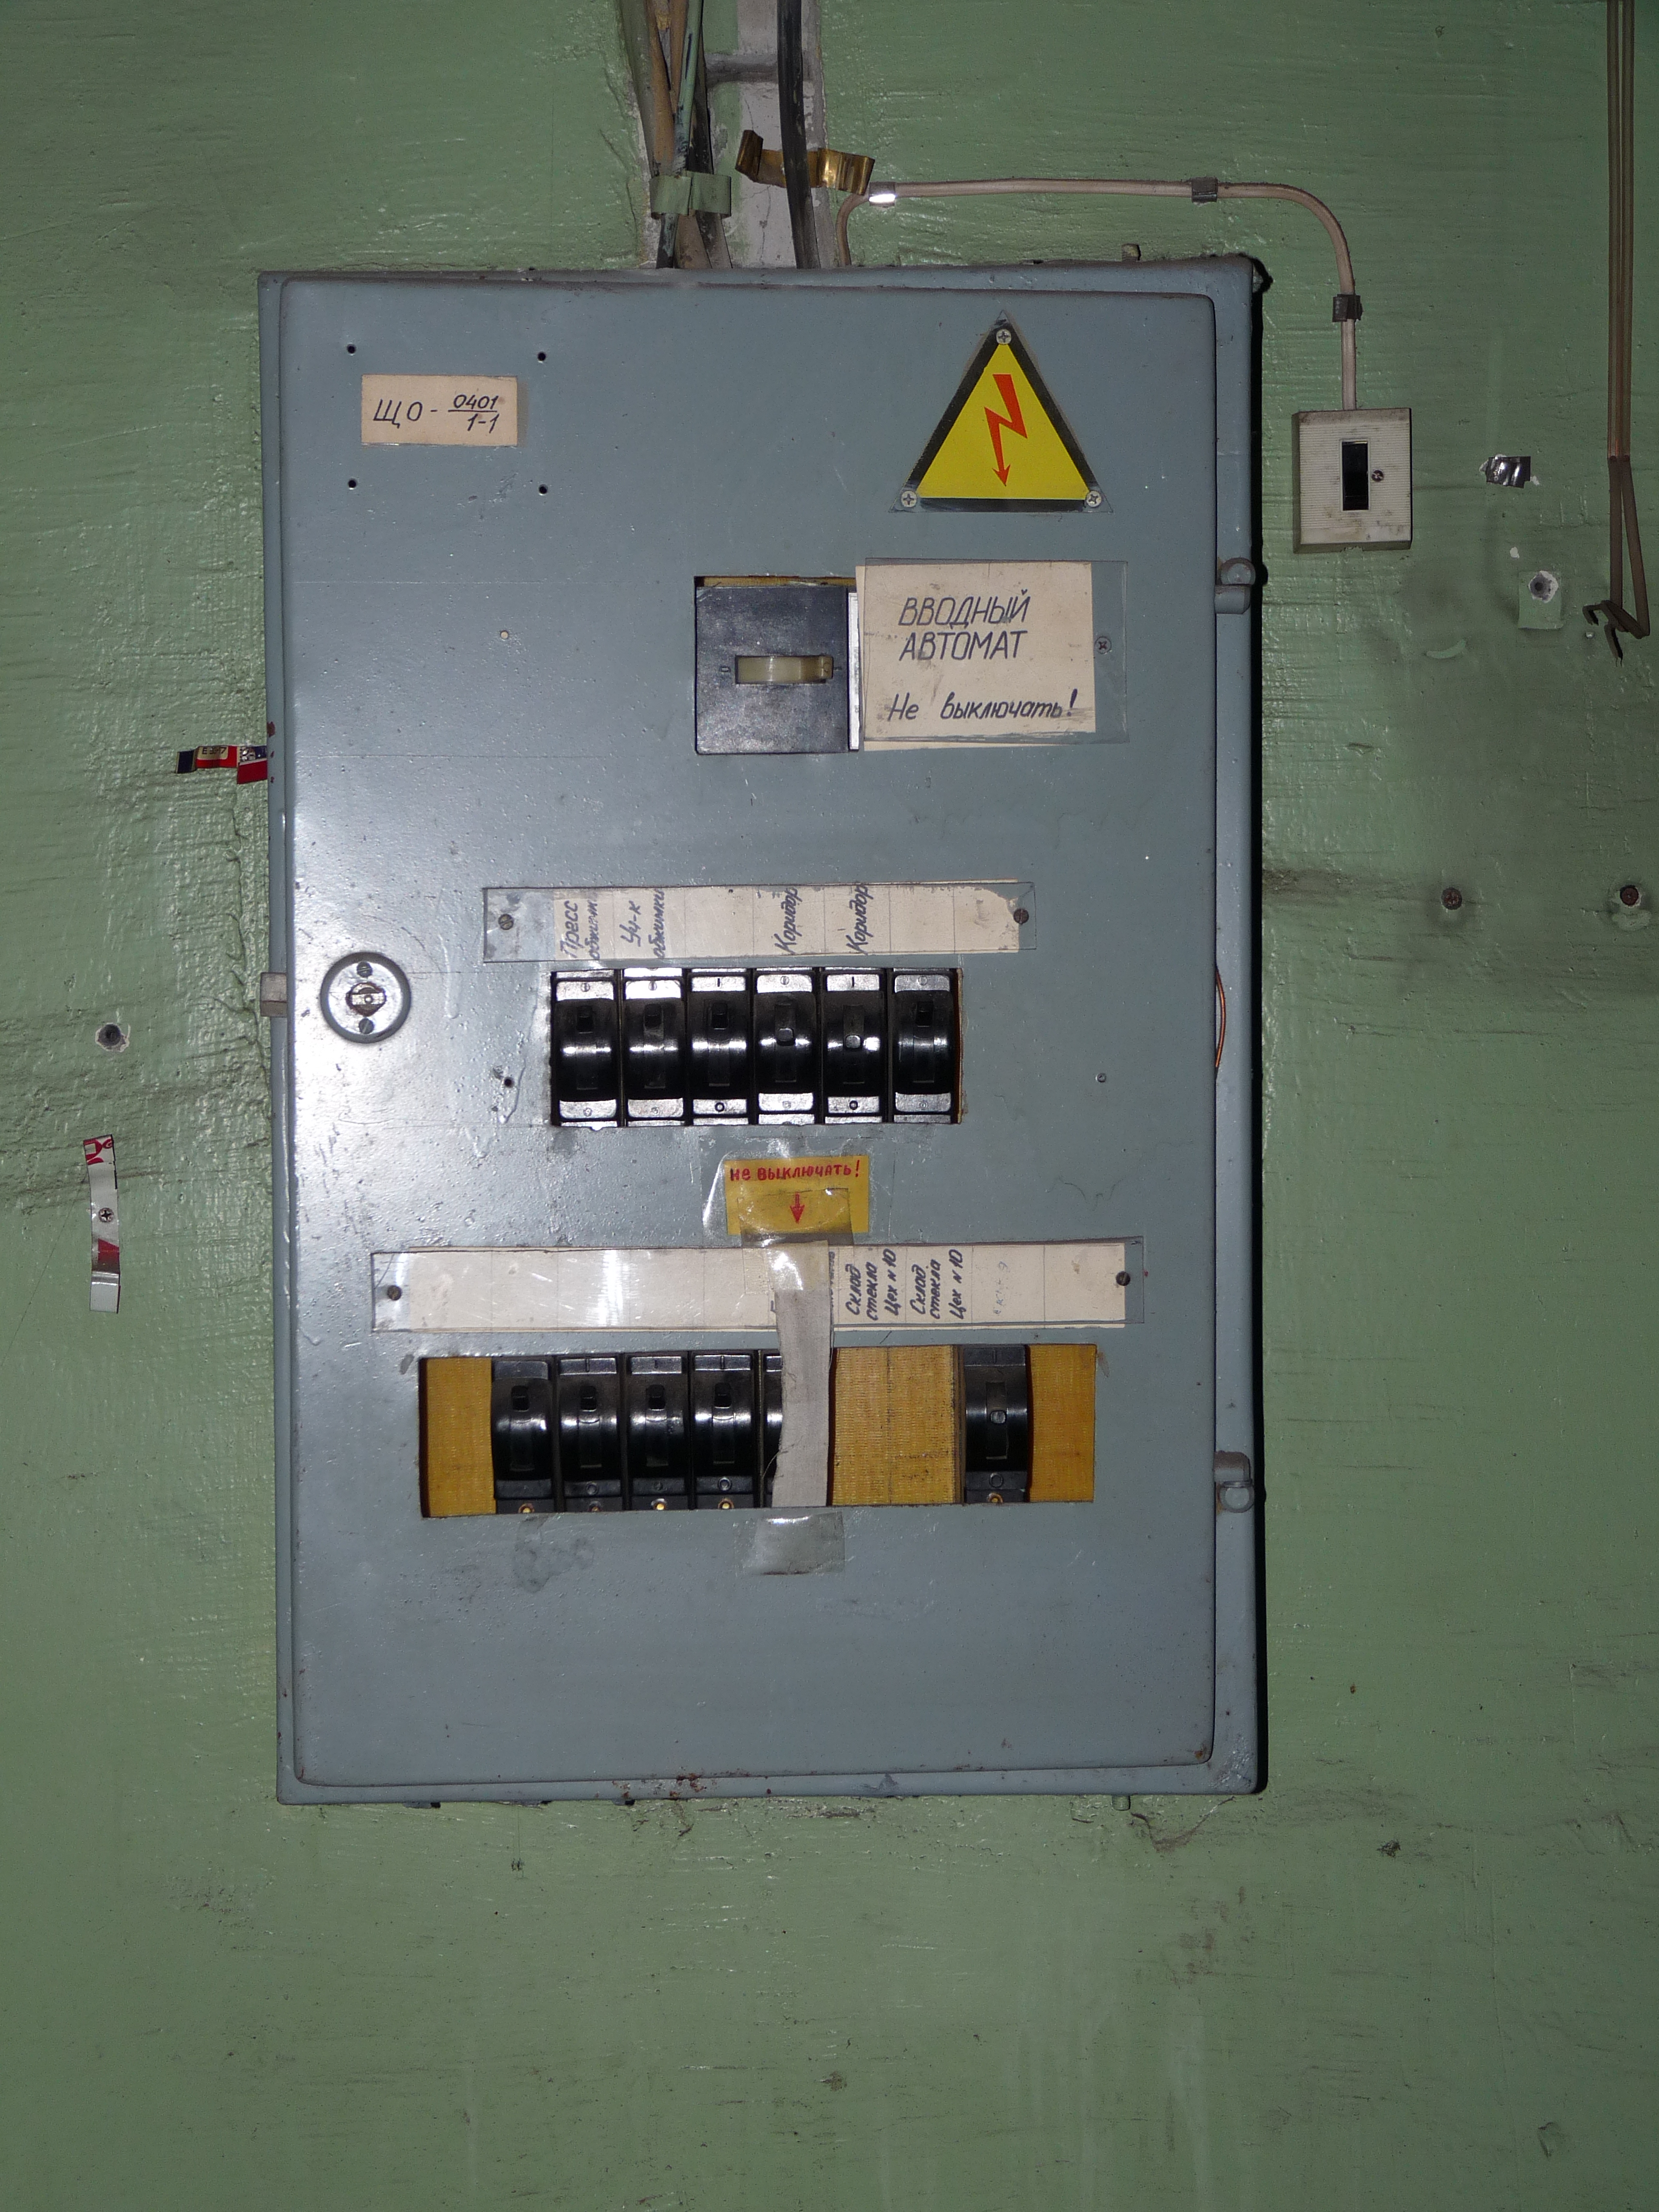 File:Old fuse box in abandoned factory.JPG - Wikimedia Commons